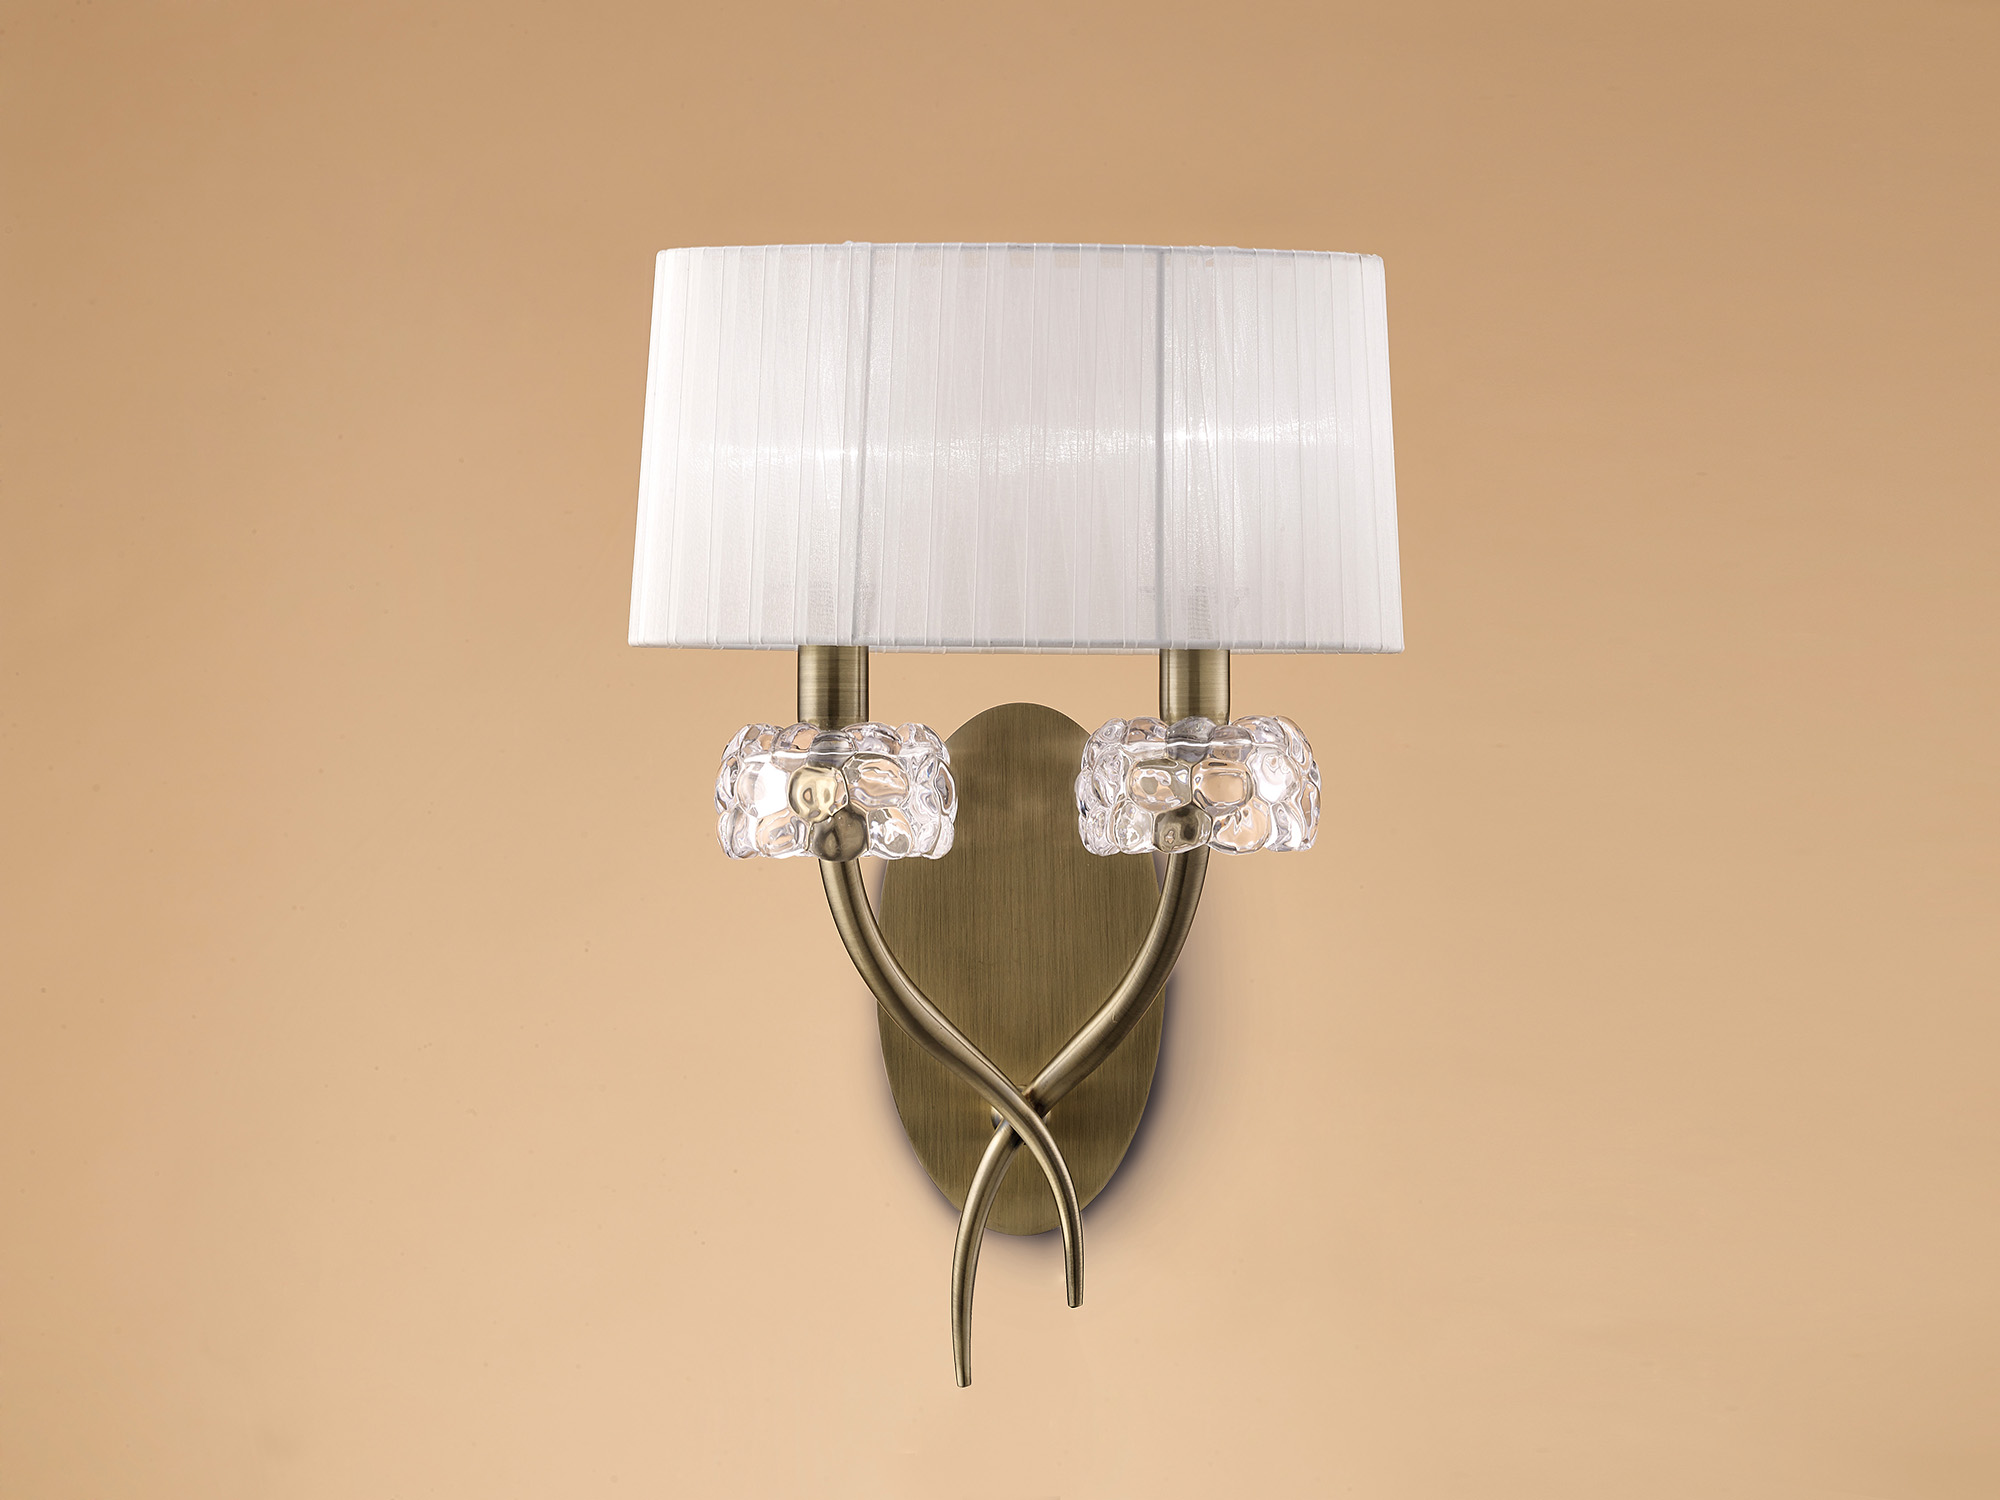 Loewe Antique Brass-White Wall Lights Mantra Armed Wall Lights